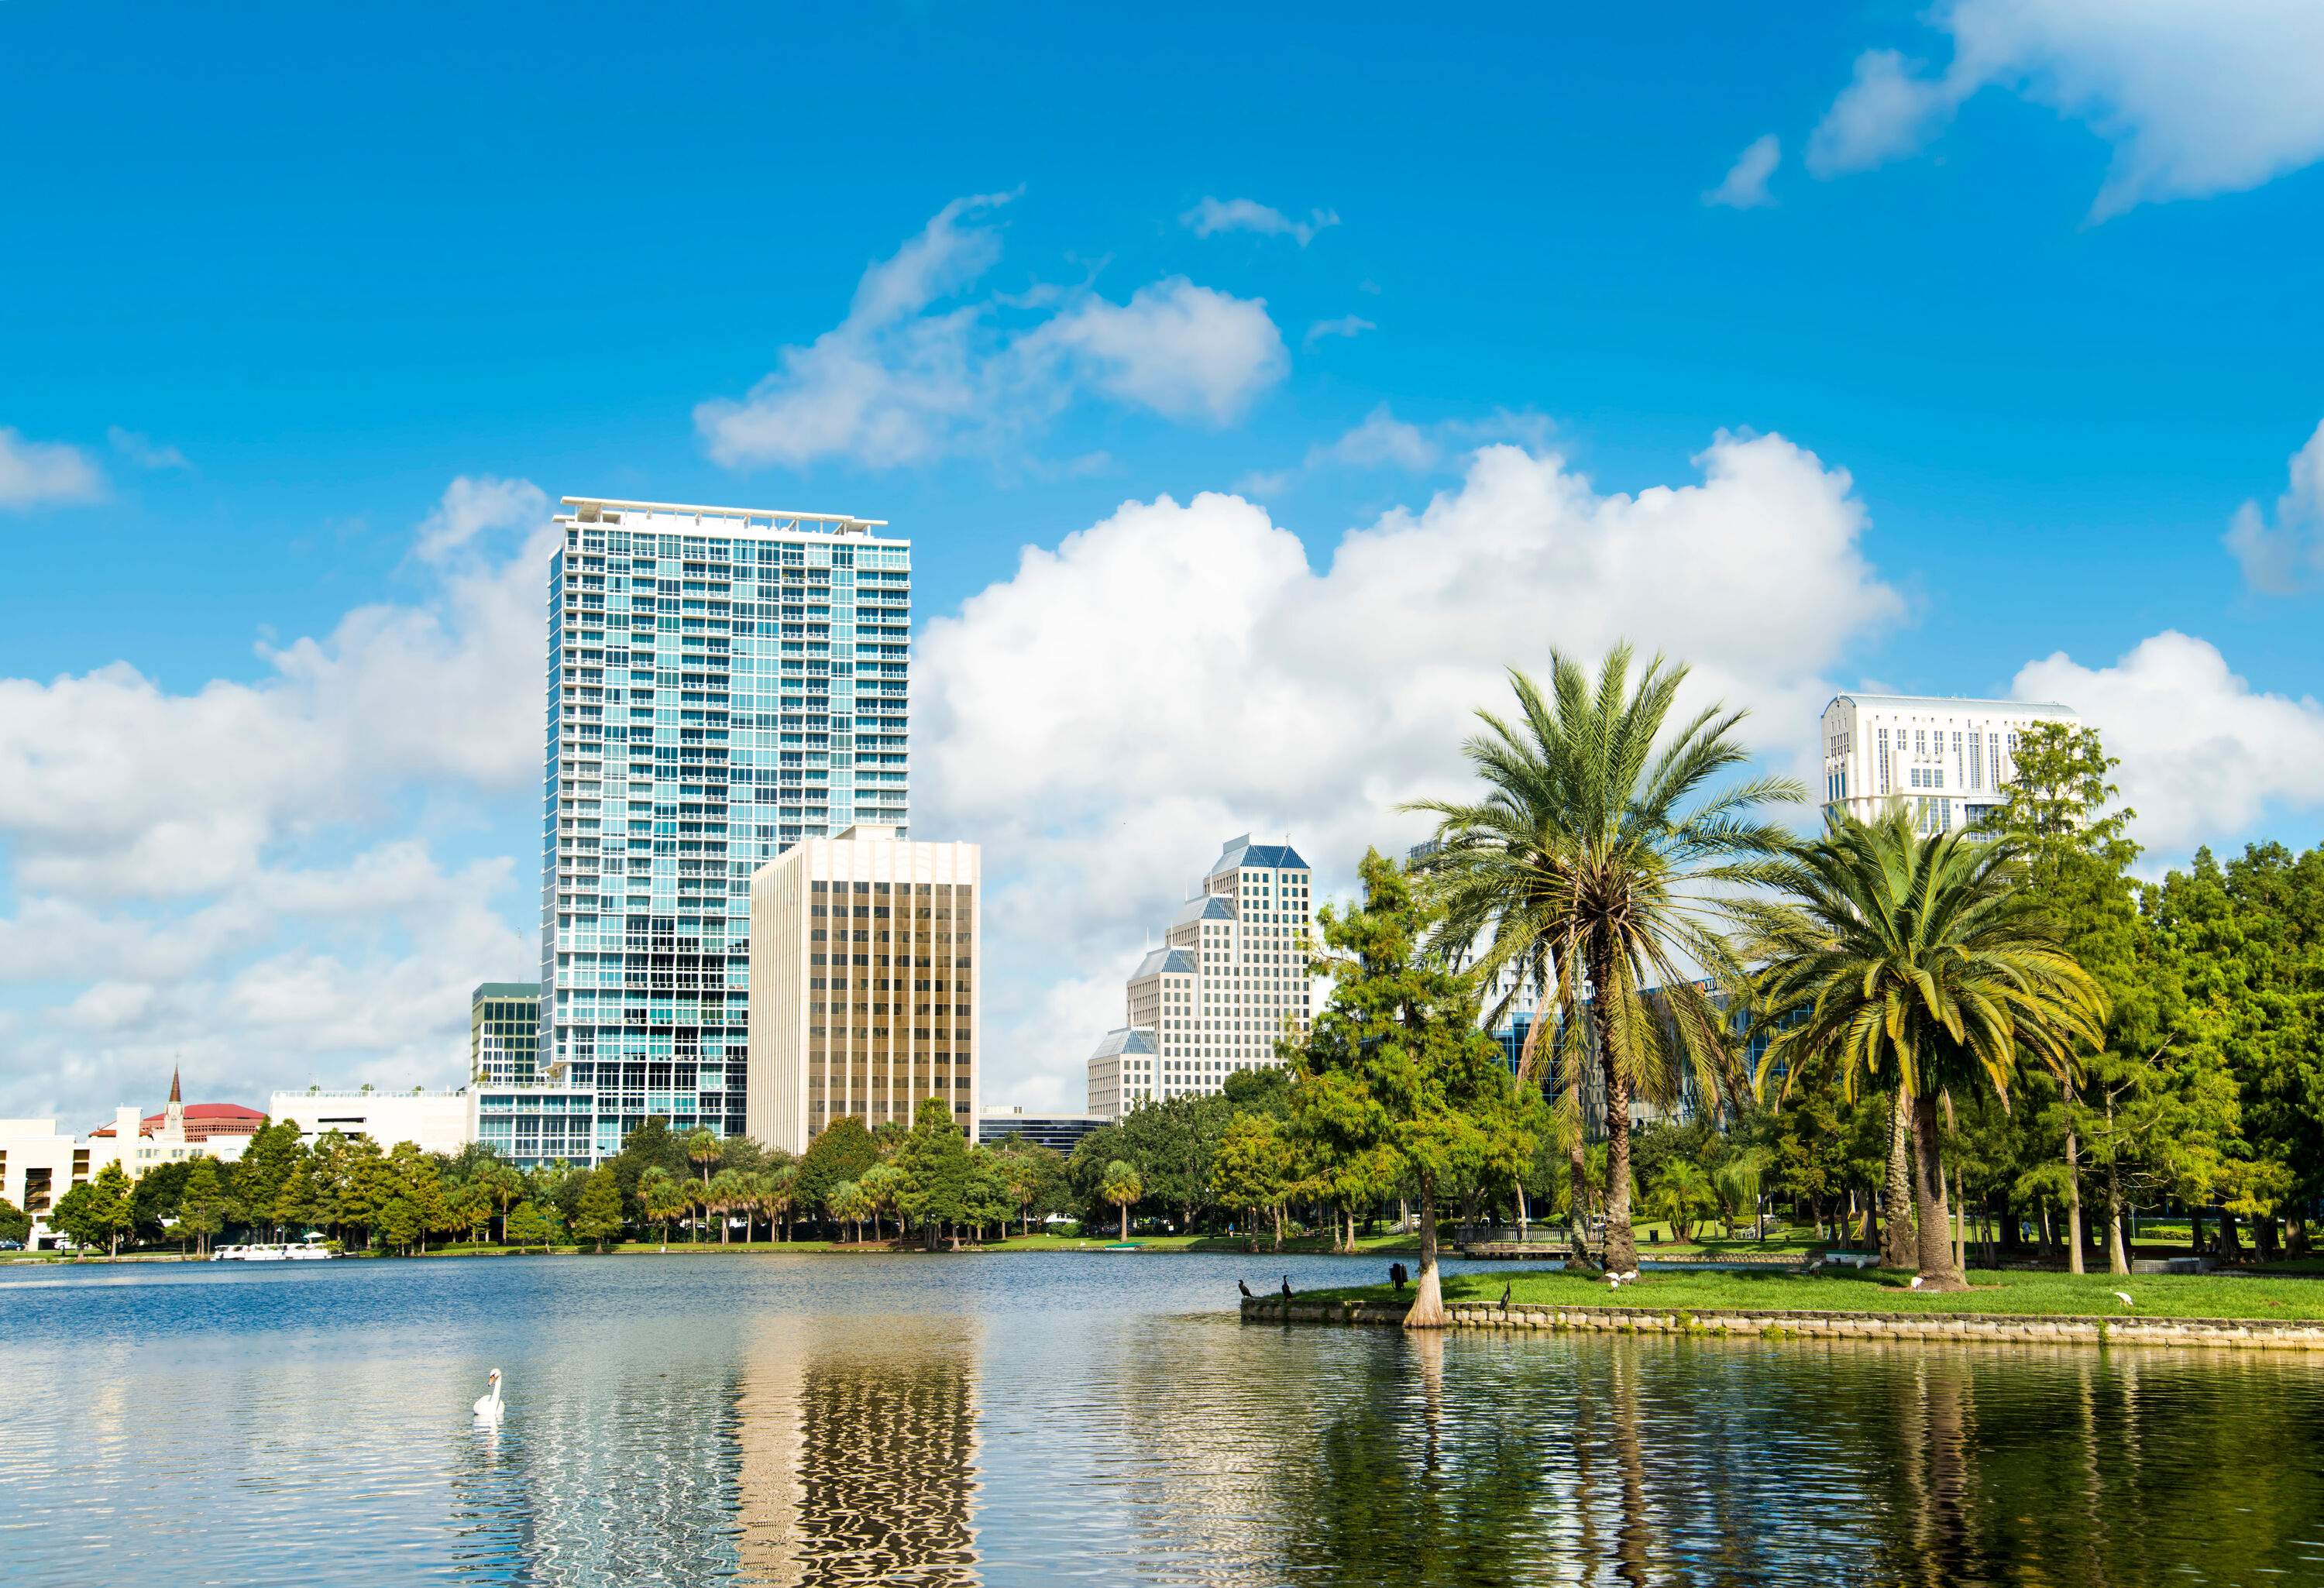 A park with lush vegetation and a pond that reflects the city skyline.